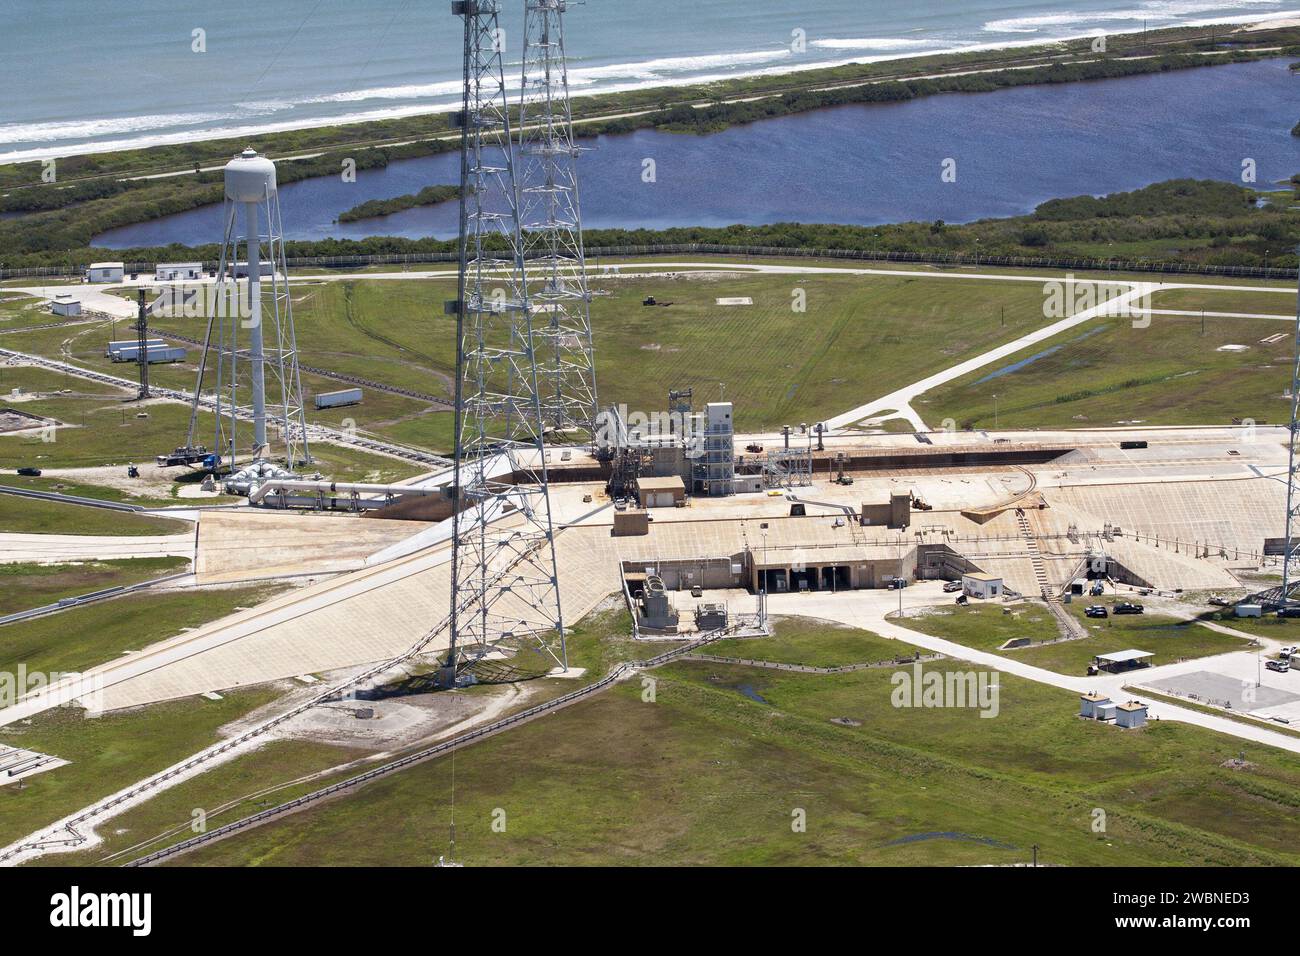 CAPE CANAVERAL, Fla. – An aerial view shows construction progress at Launch Pad 39B at NASA’s Kennedy Space Center in Florida. A new elevator has been constructed on the surface of the pad and the crawlerway leading up to the surface is being repaired. Repairs also are being made to the crawler track panels and catacomb roof below on either side of the flame trench. Also in view are the water tower and two of the three tall lightning towers that surround the pad. Upgrades are underway at Pad B and other facilities in the Launch Complex 39 area. The Ground Systems Development and Operations, or Stock Photo